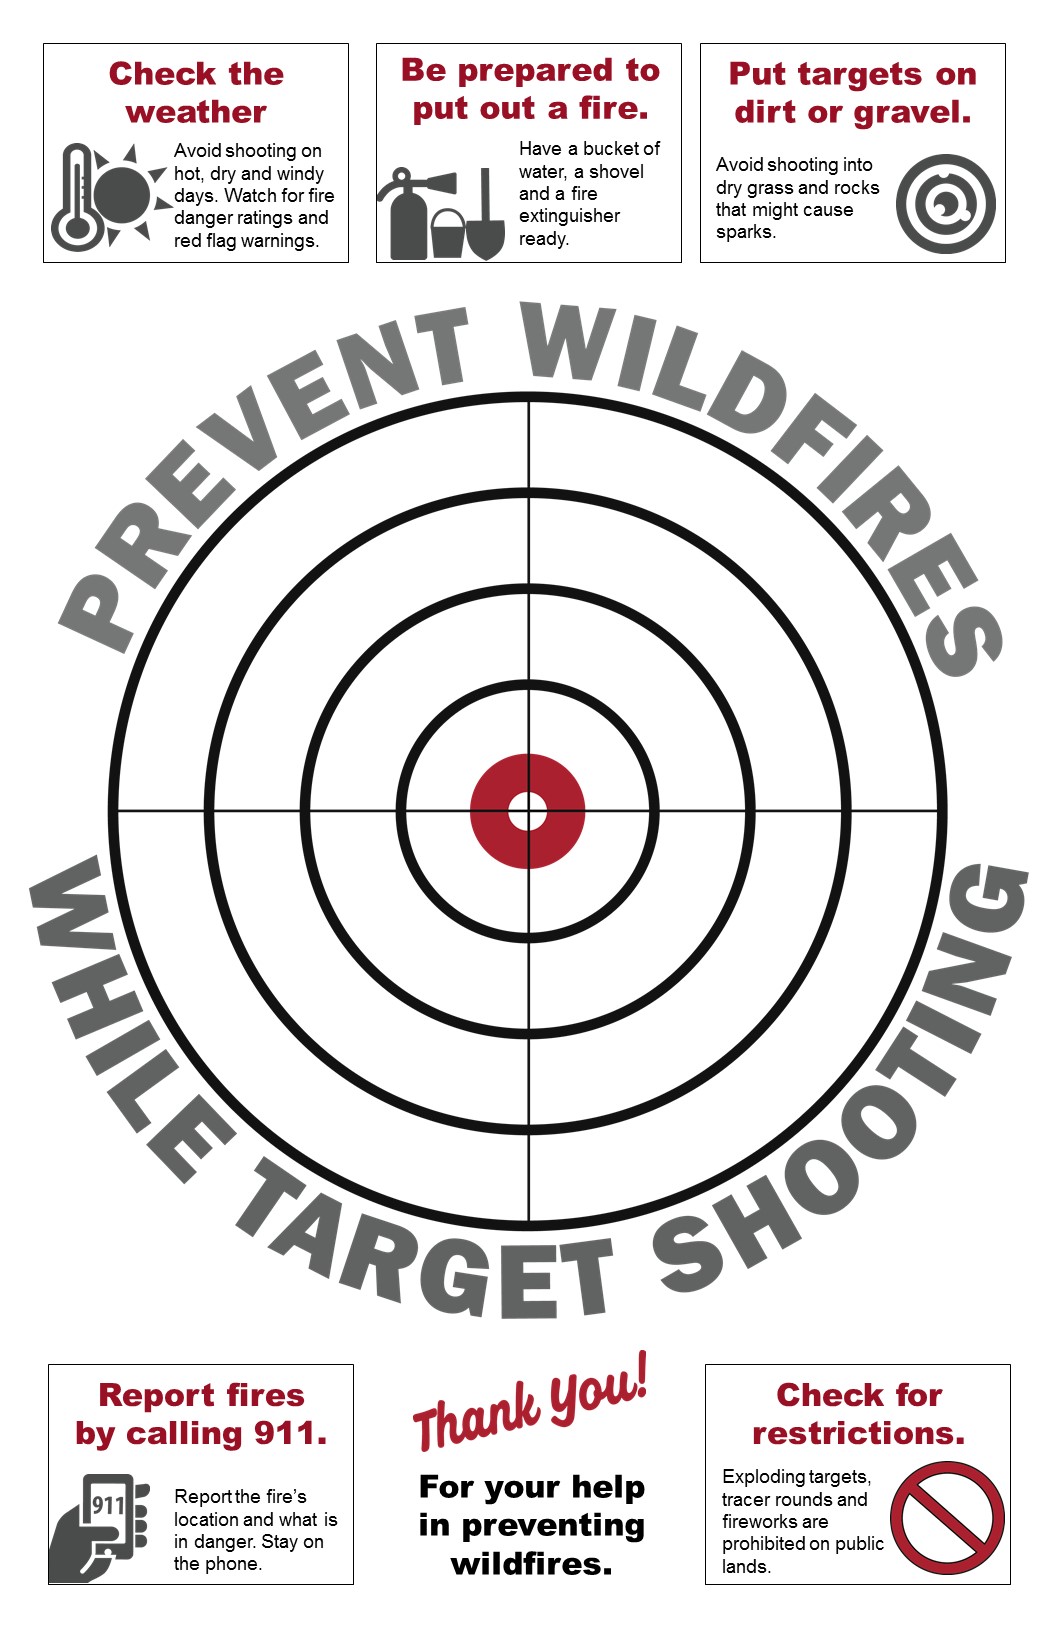 Prevent Wildfires while target shooting, 11x17 circle target with fire prevention tips